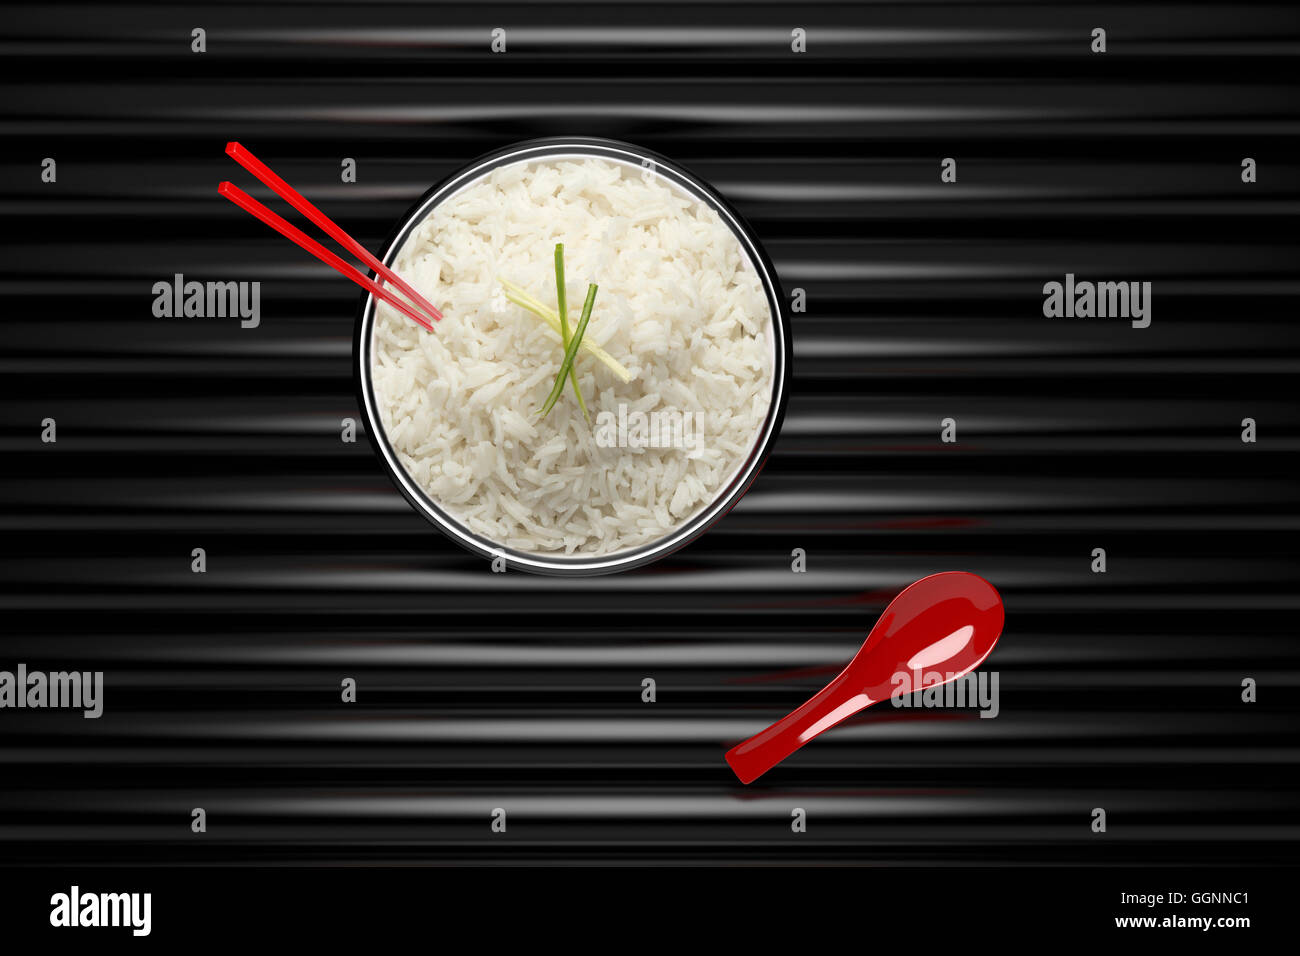 Chopsticks in bowl of white rice with red spoon Stock Photo